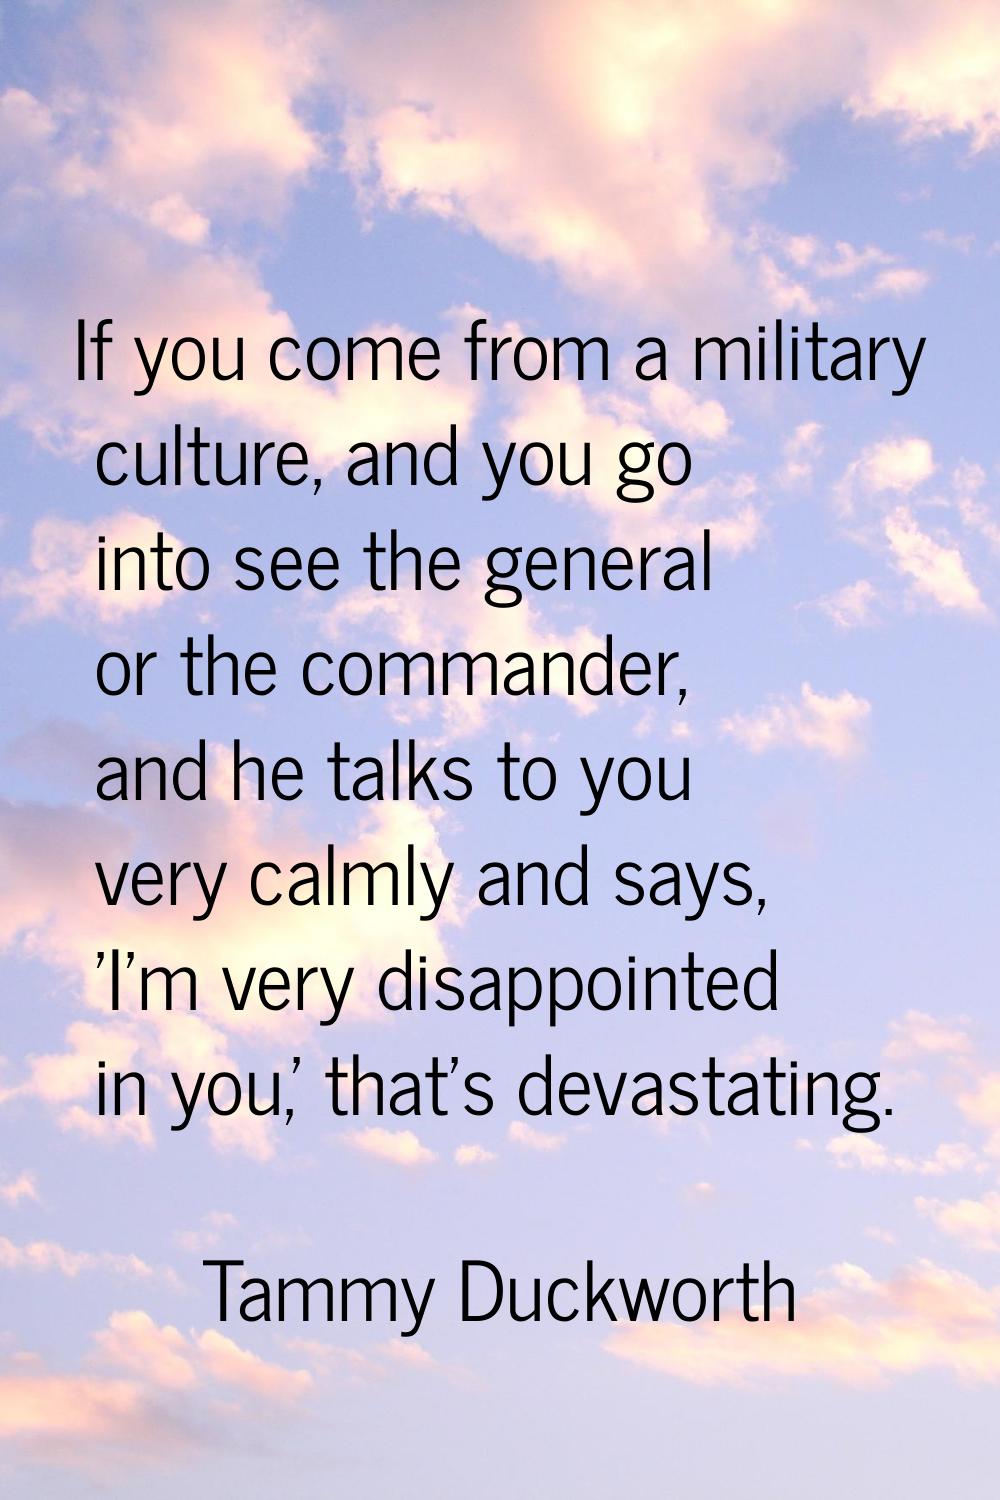 If you come from a military culture, and you go into see the general or the commander, and he talks